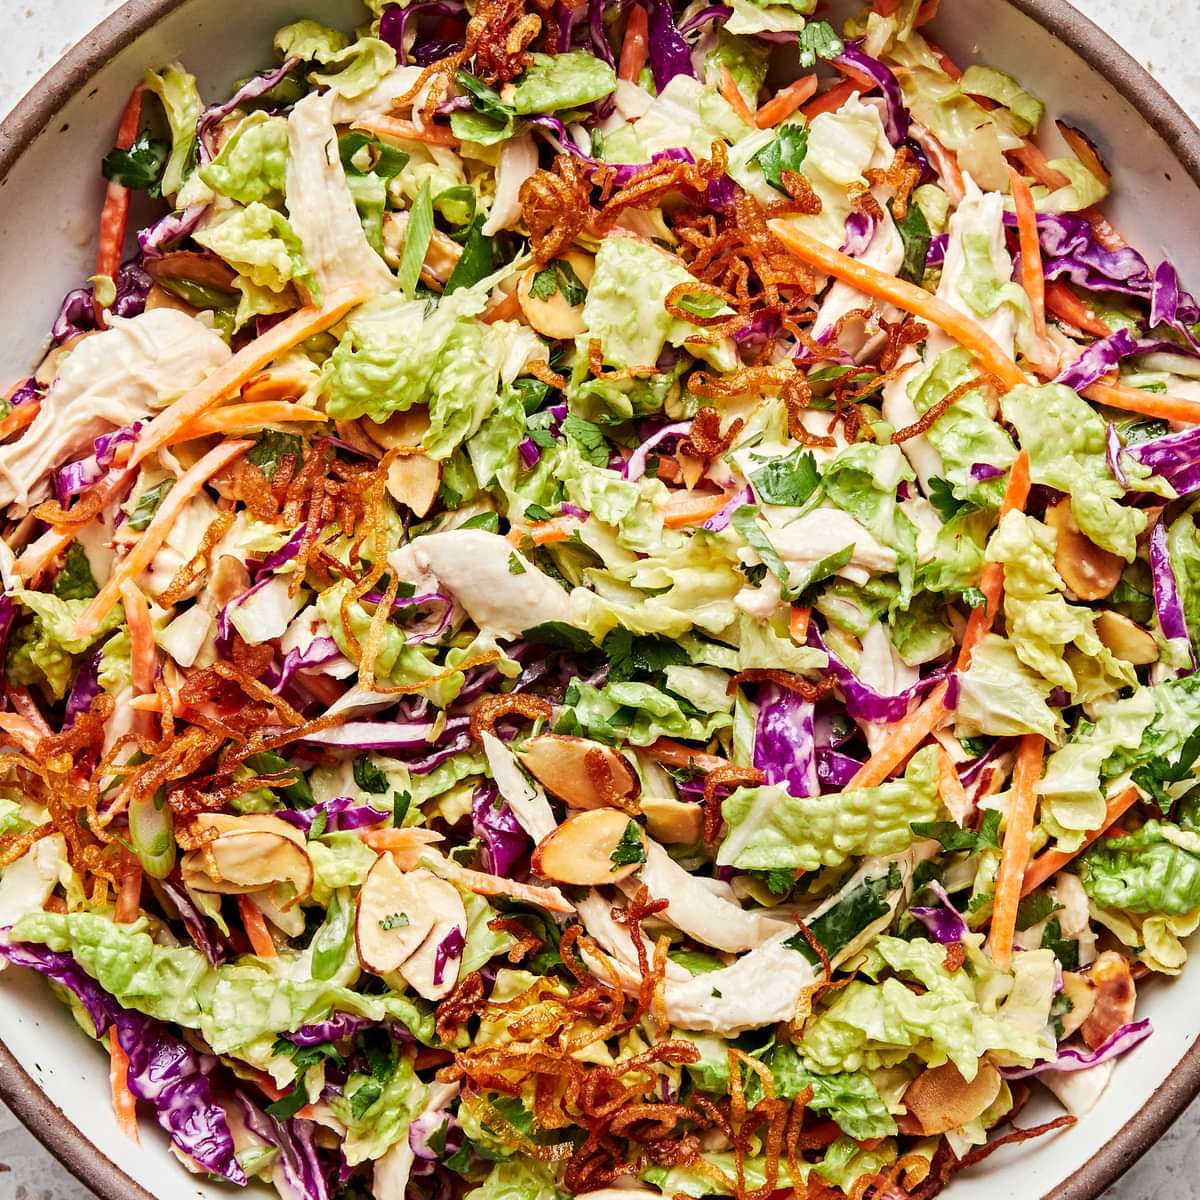 miso-ginger chicken slaw made with cabbage, almonds, cilantro, carrots, green onion, sesame oil, vinegar and spices